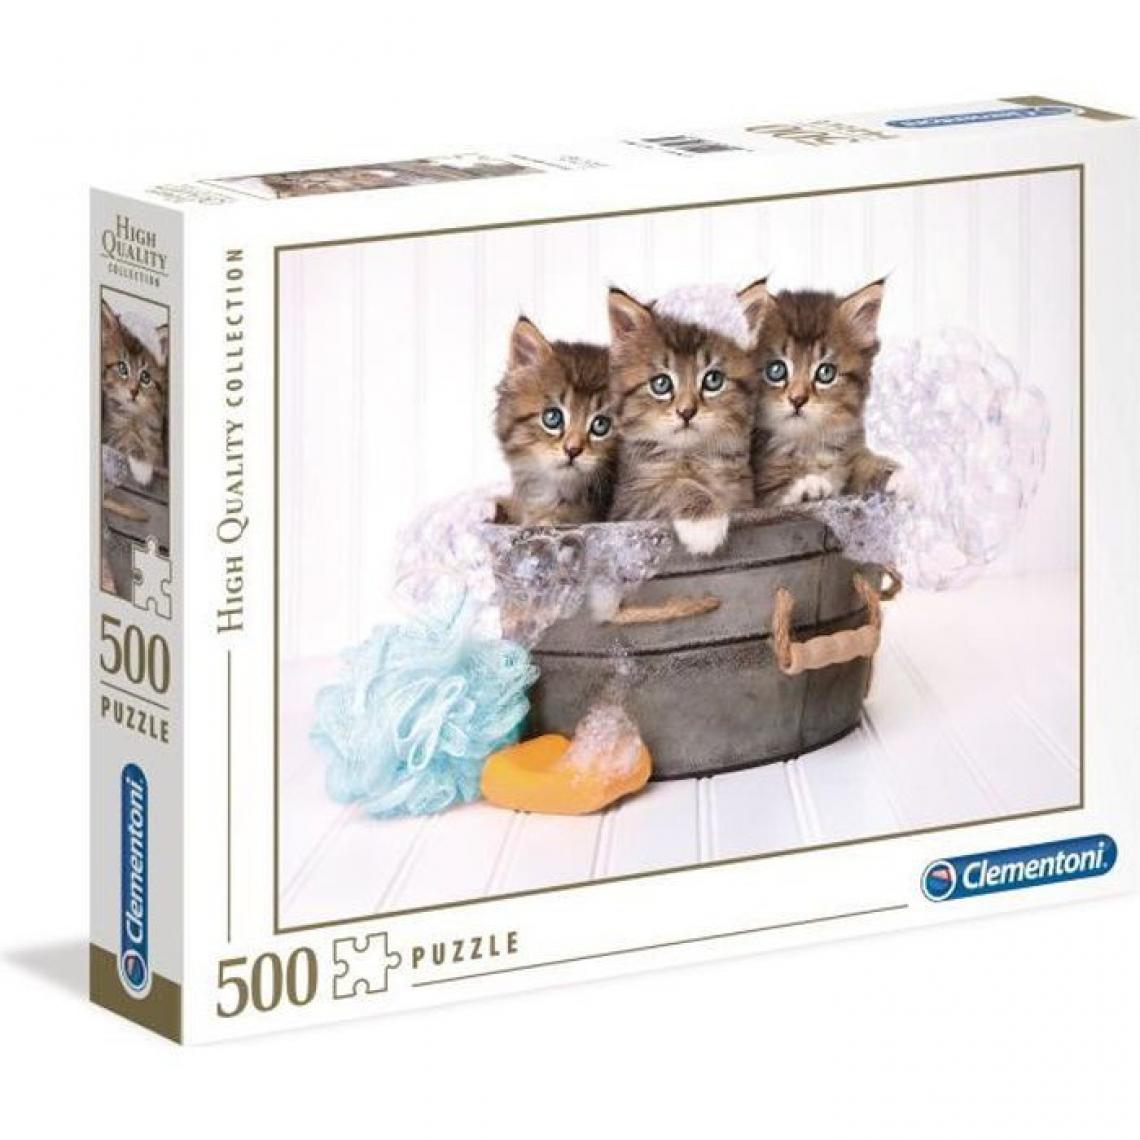 Clementoni - PUZZLE 500 pieces - Kittens and soap - 49 X 36 cm - Animaux